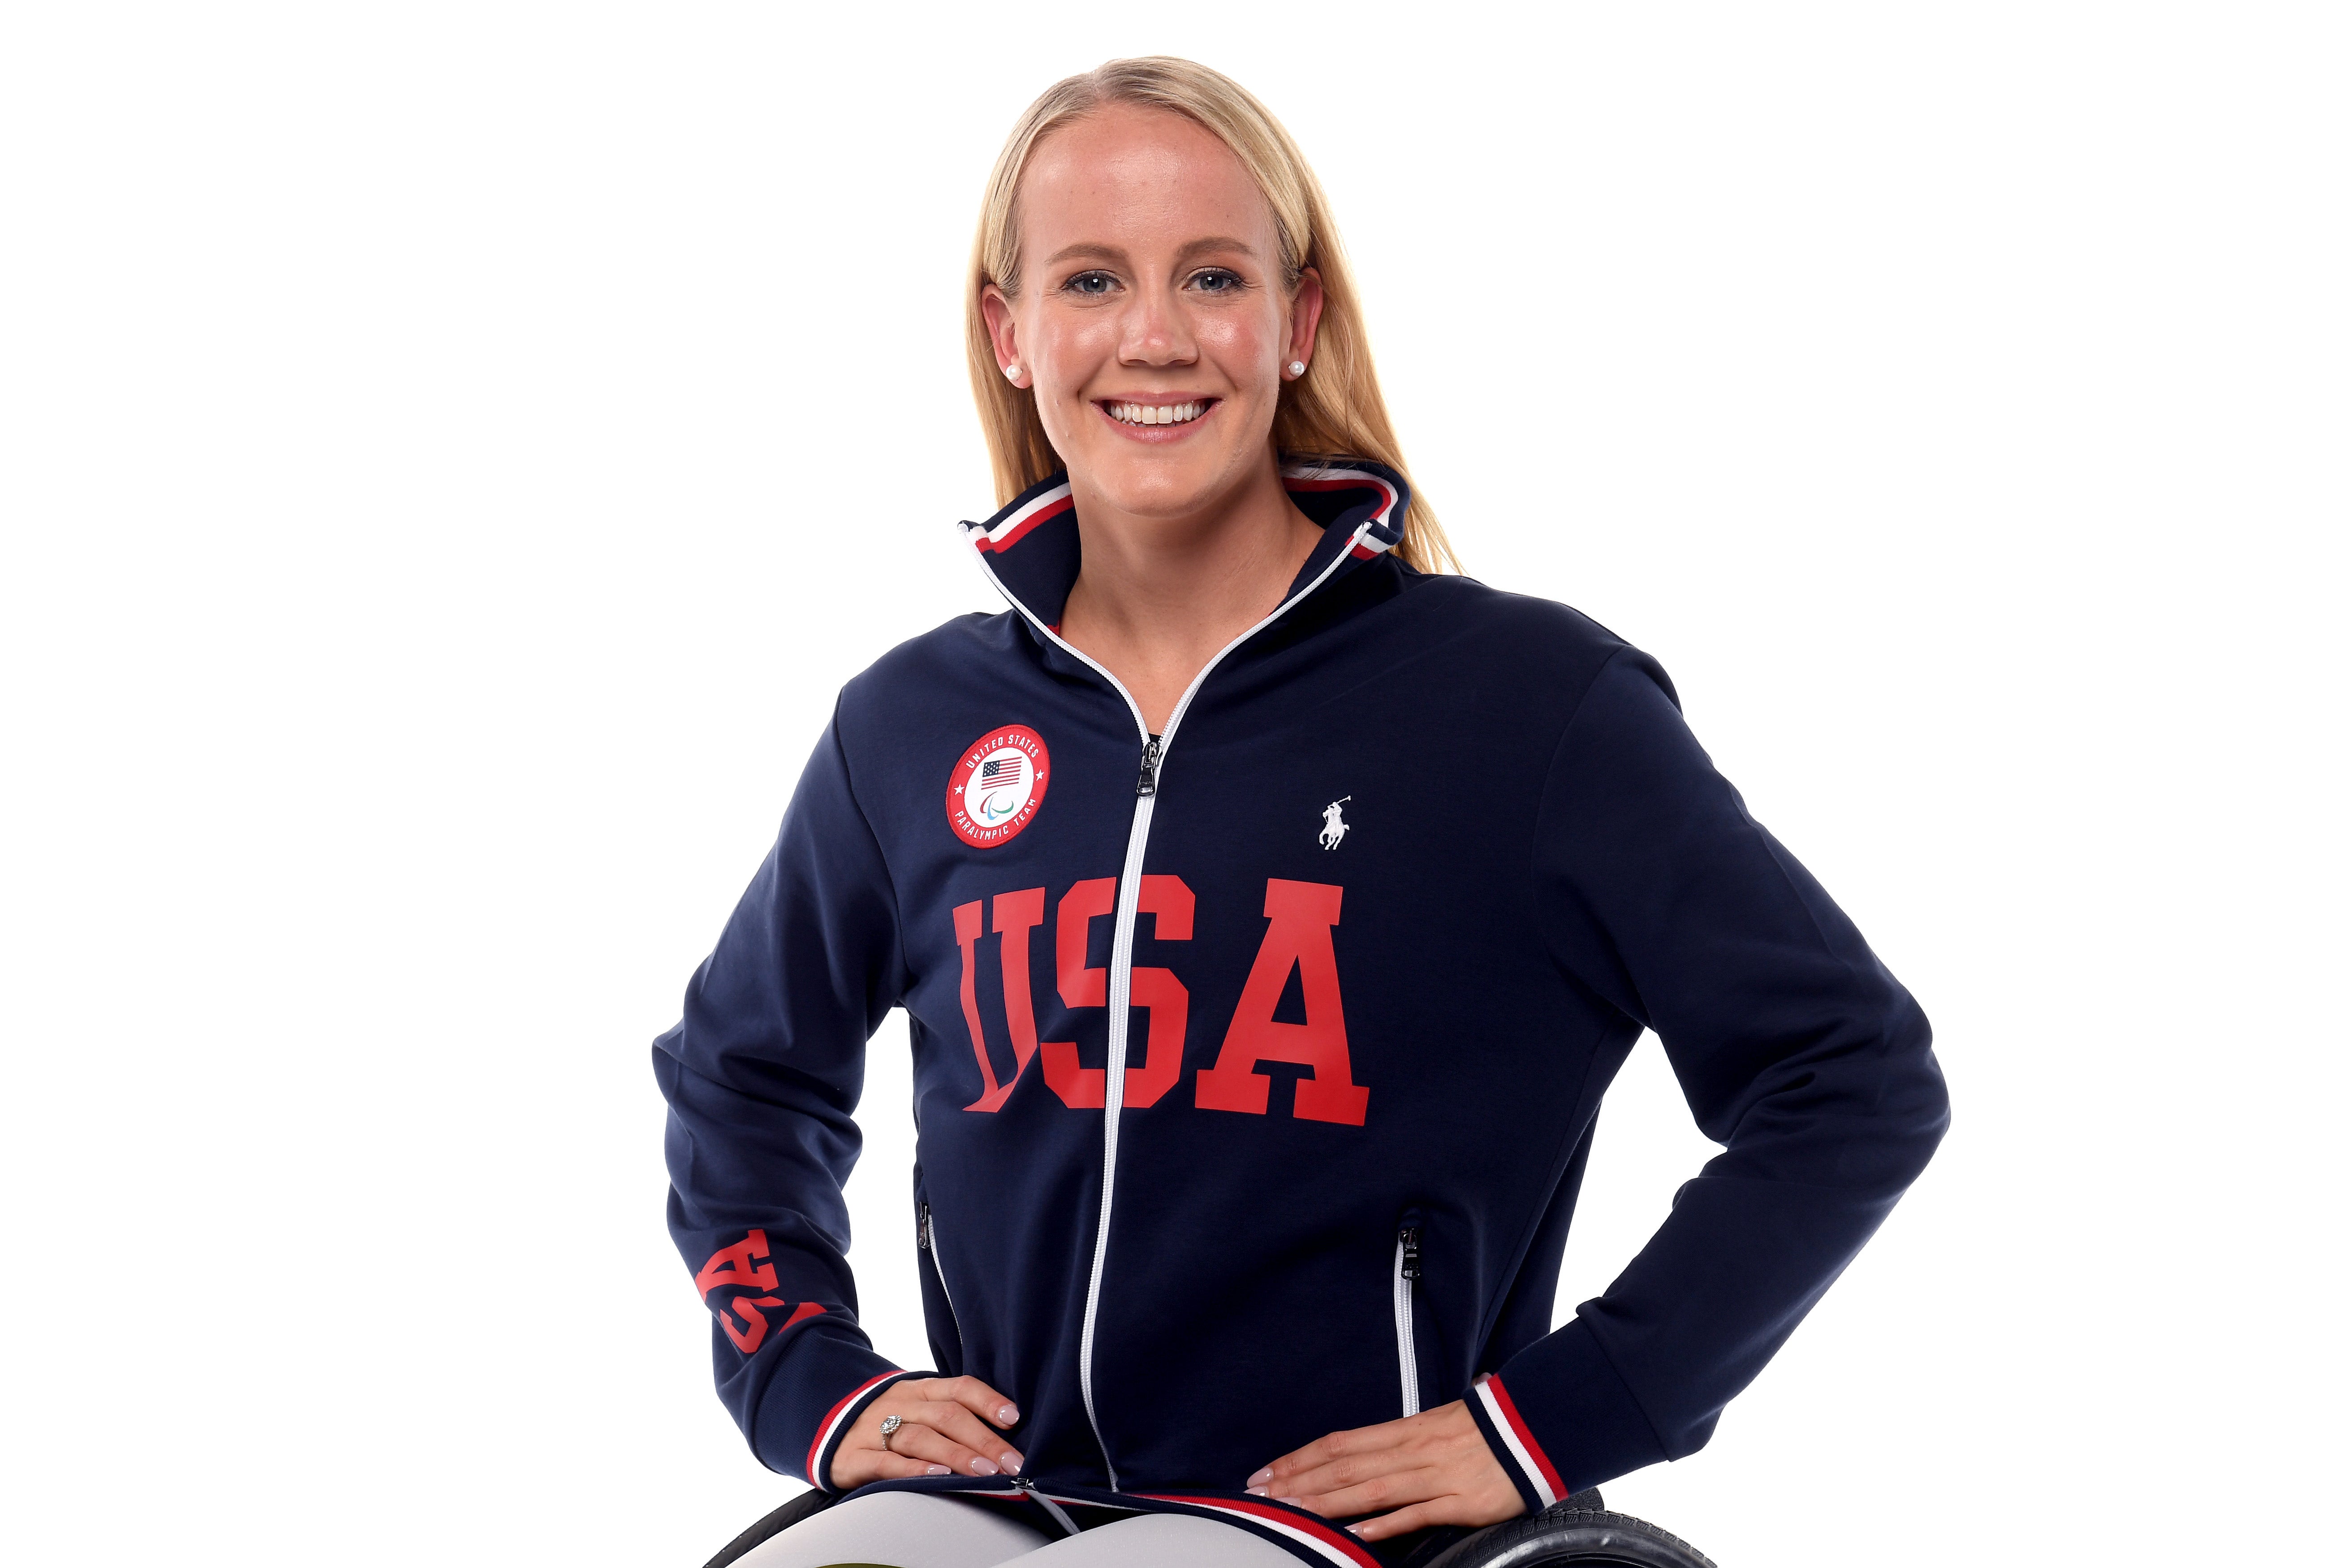 Para swimmer Mallory Weggemann poses for a portrait during the Team USA Tokyo 2020 Olympic shoot on November 22, 2019 in West Hollywood, California